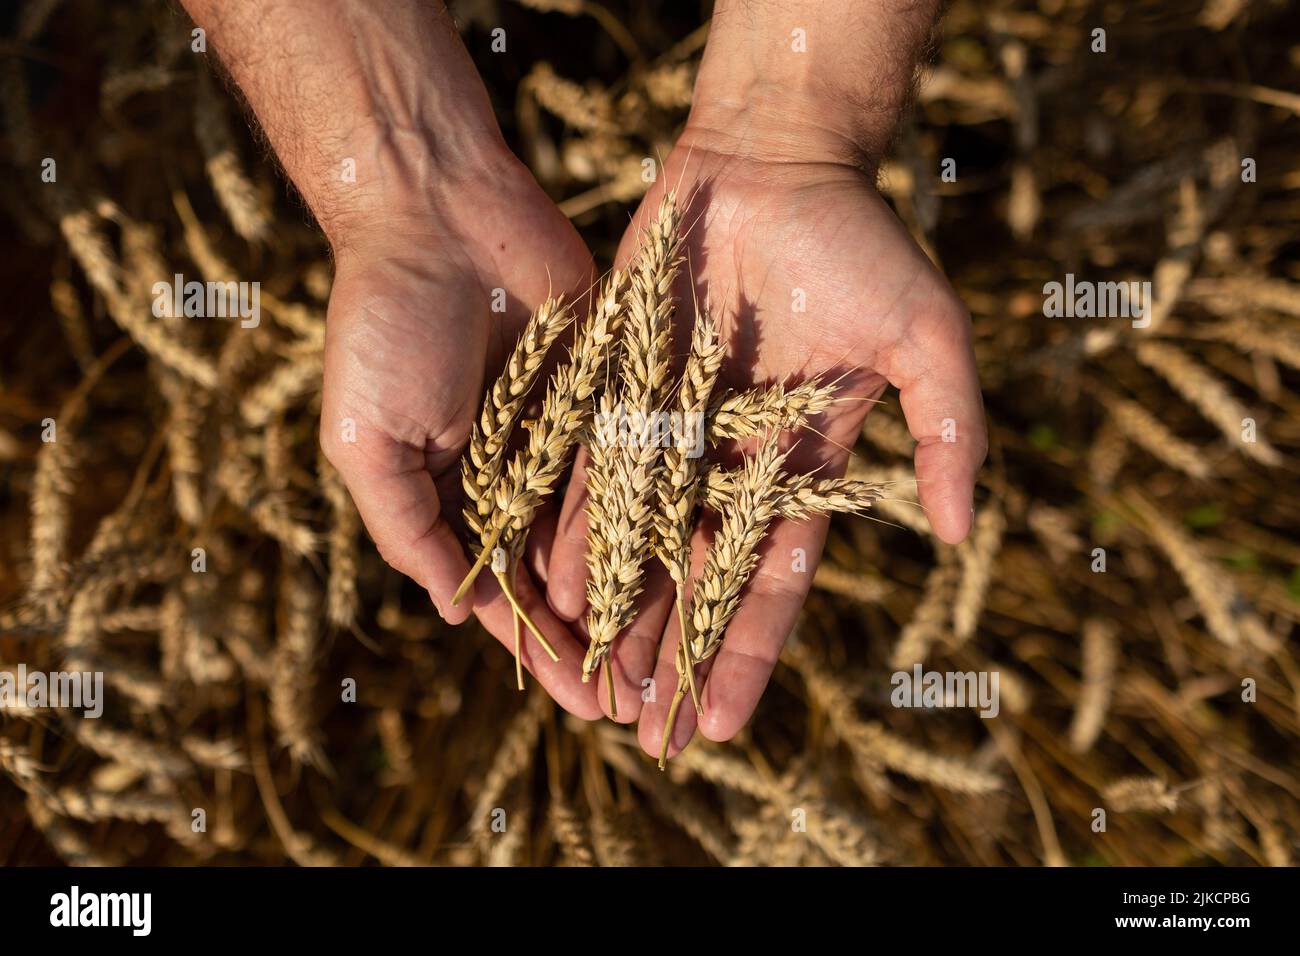 The farmer's hand holds the plucked ears of wheat in his hand Stock Photo